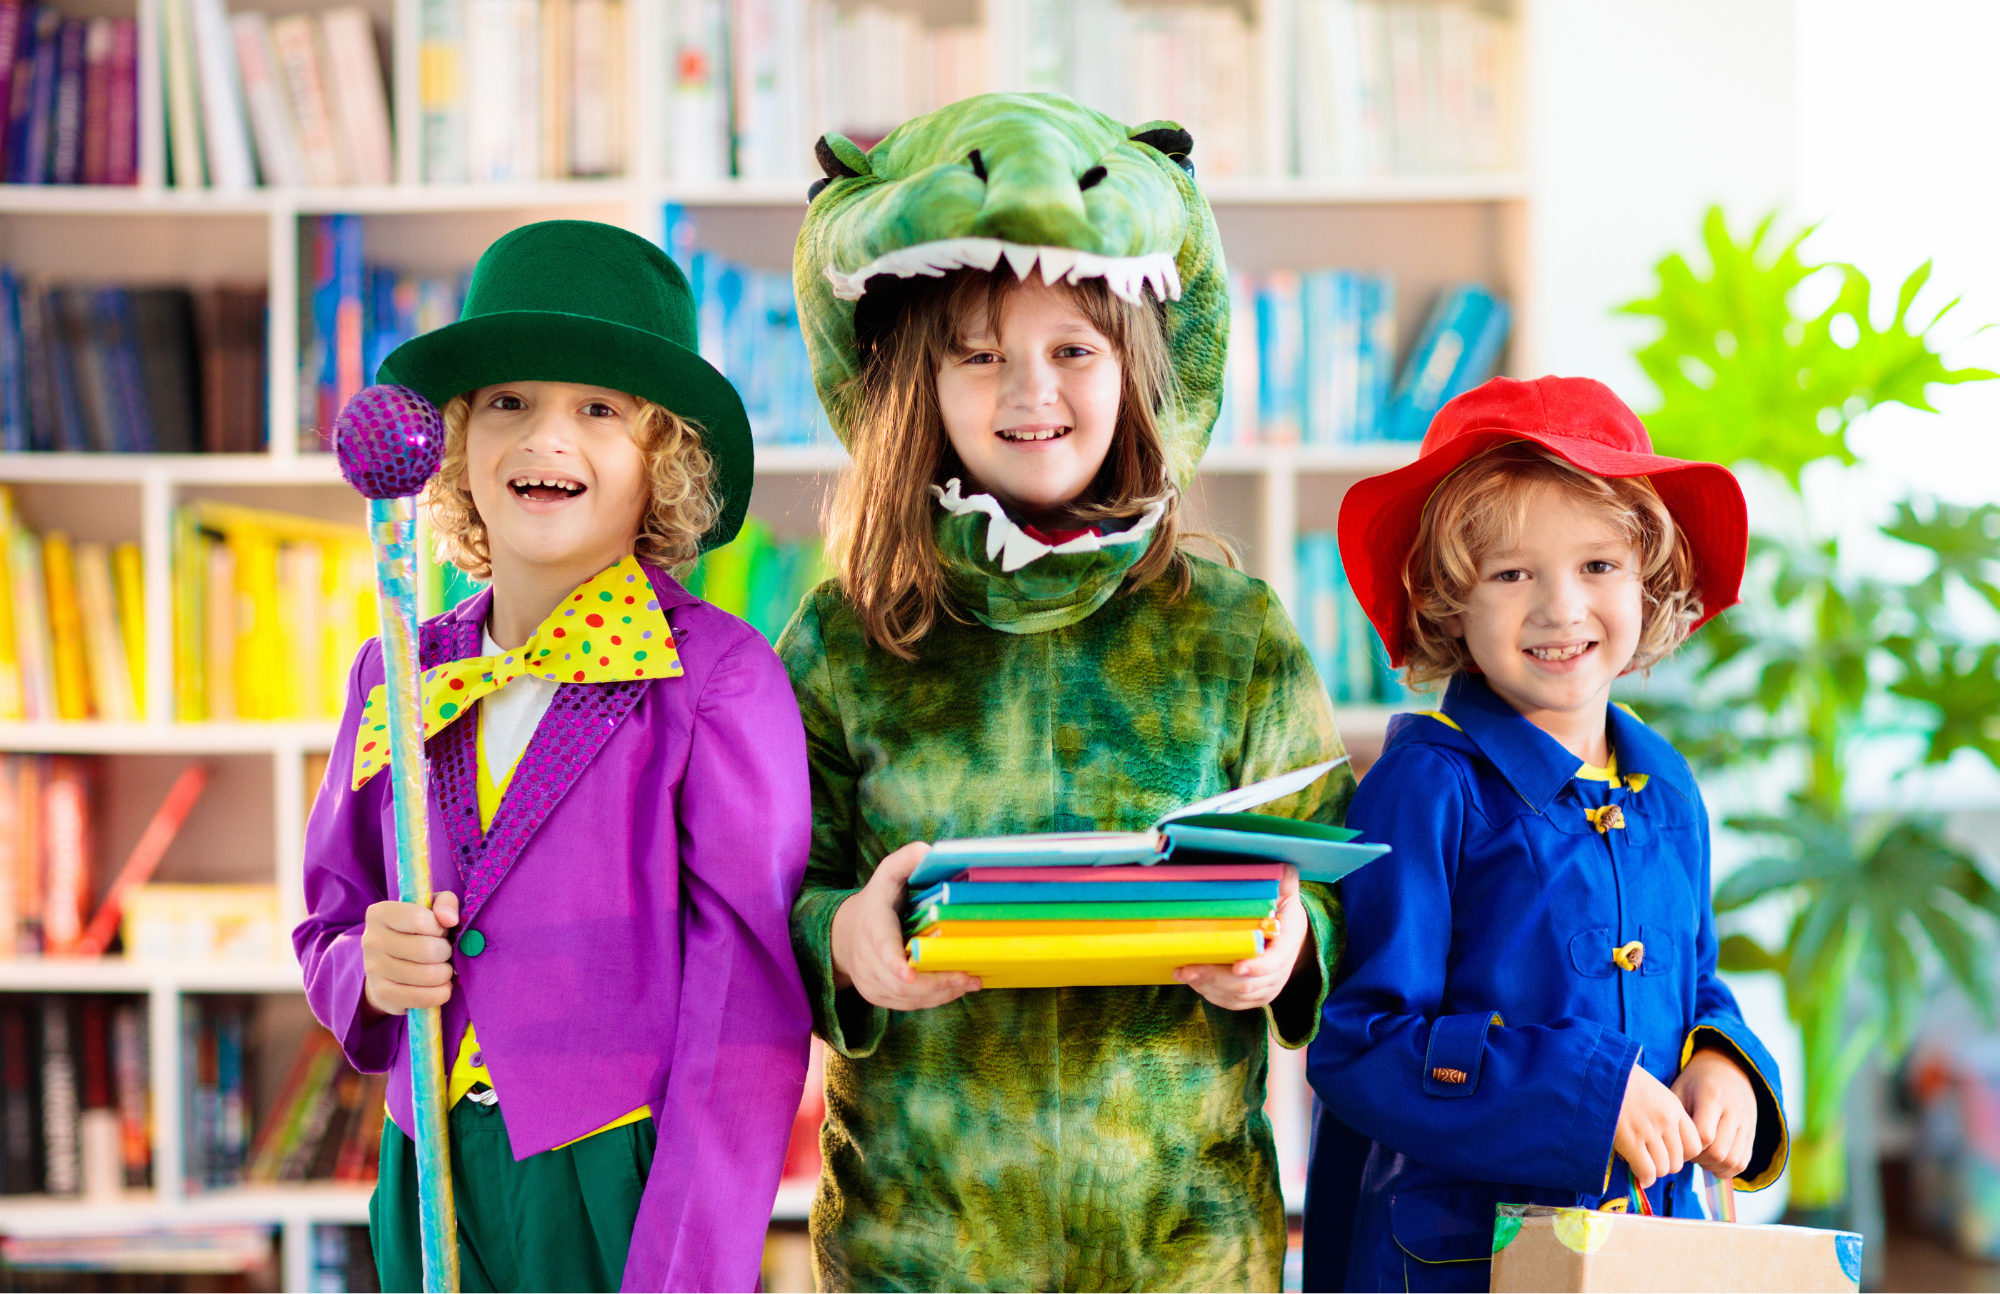 Image of kids dressed in costumes